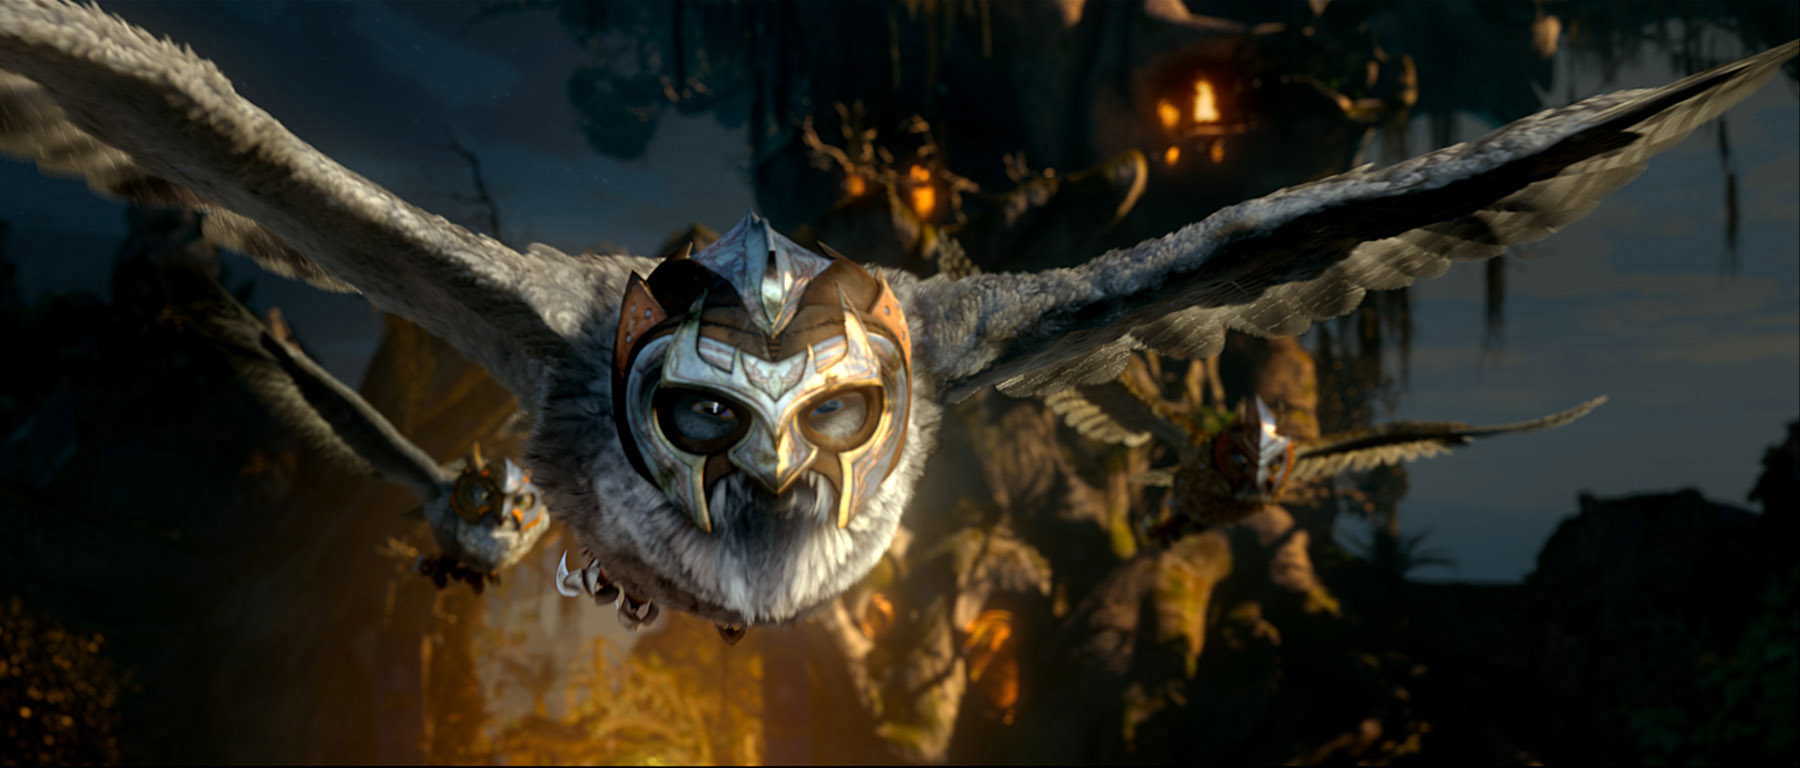 Legend Of The Guardians: The Owls Of Ga'Hoole Backgrounds, Compatible - PC, Mobile, Gadgets| 1800x768 px